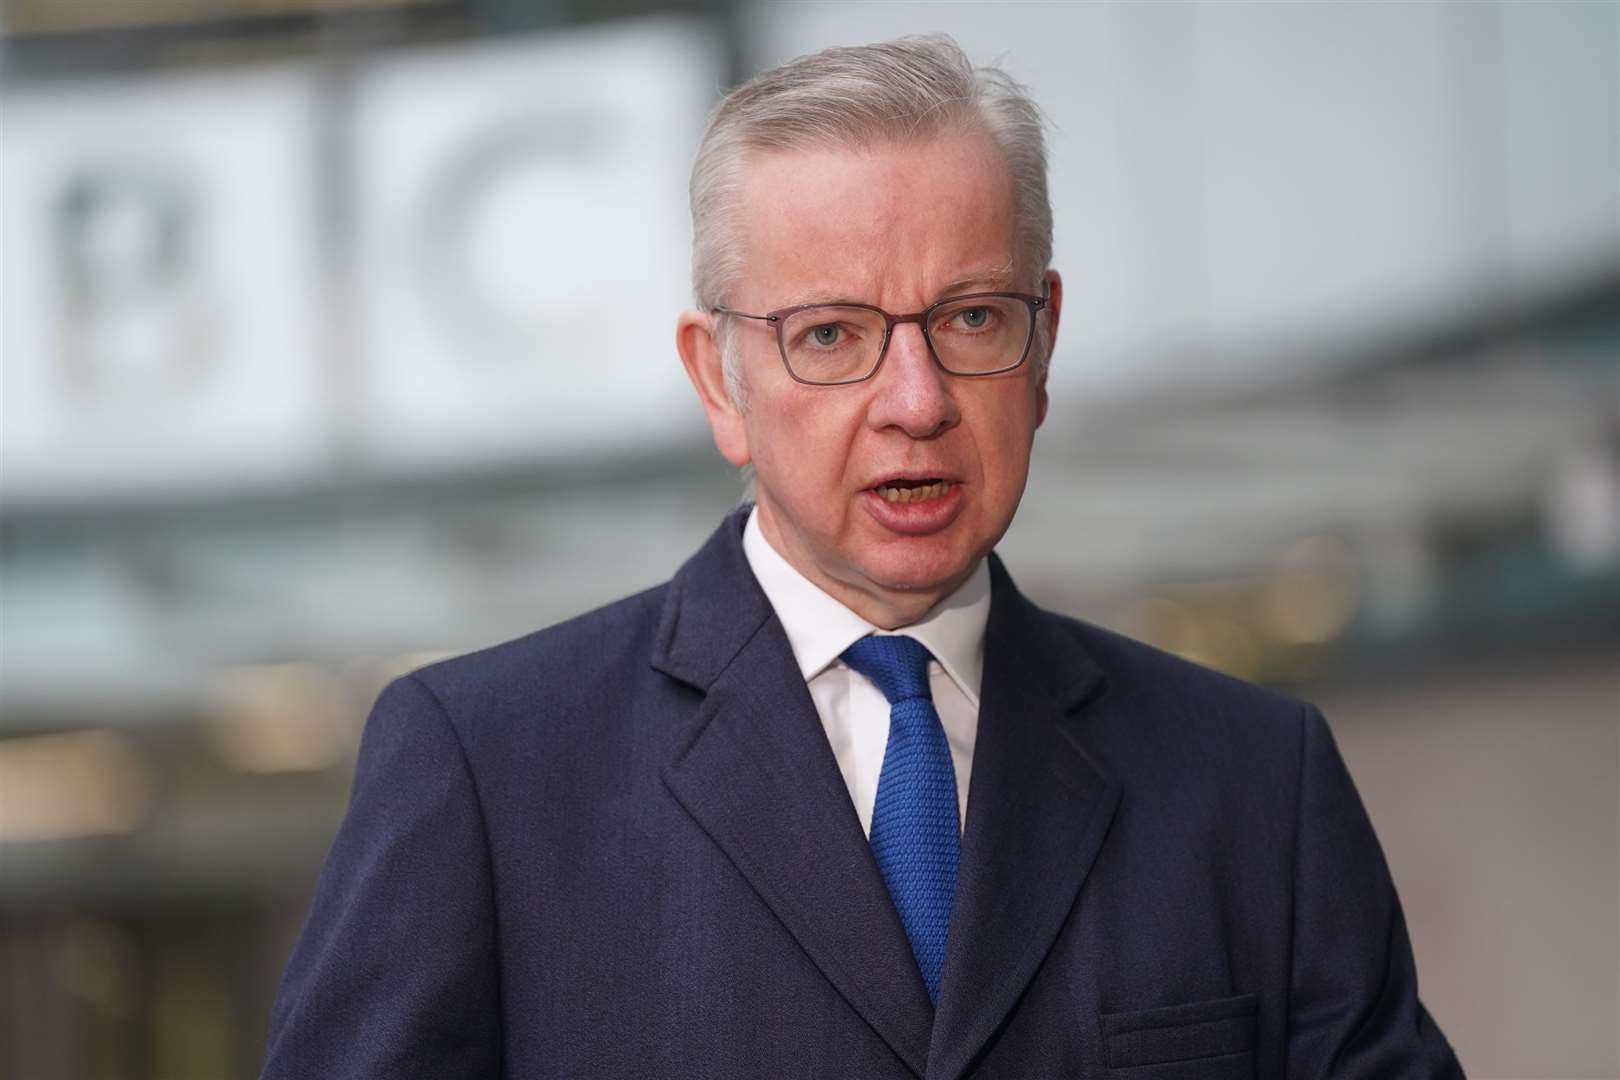 Cabinet minister Michael Gove suggested political correctness should not impair the UK’s ability to defend its borders (Lucy North/PA)